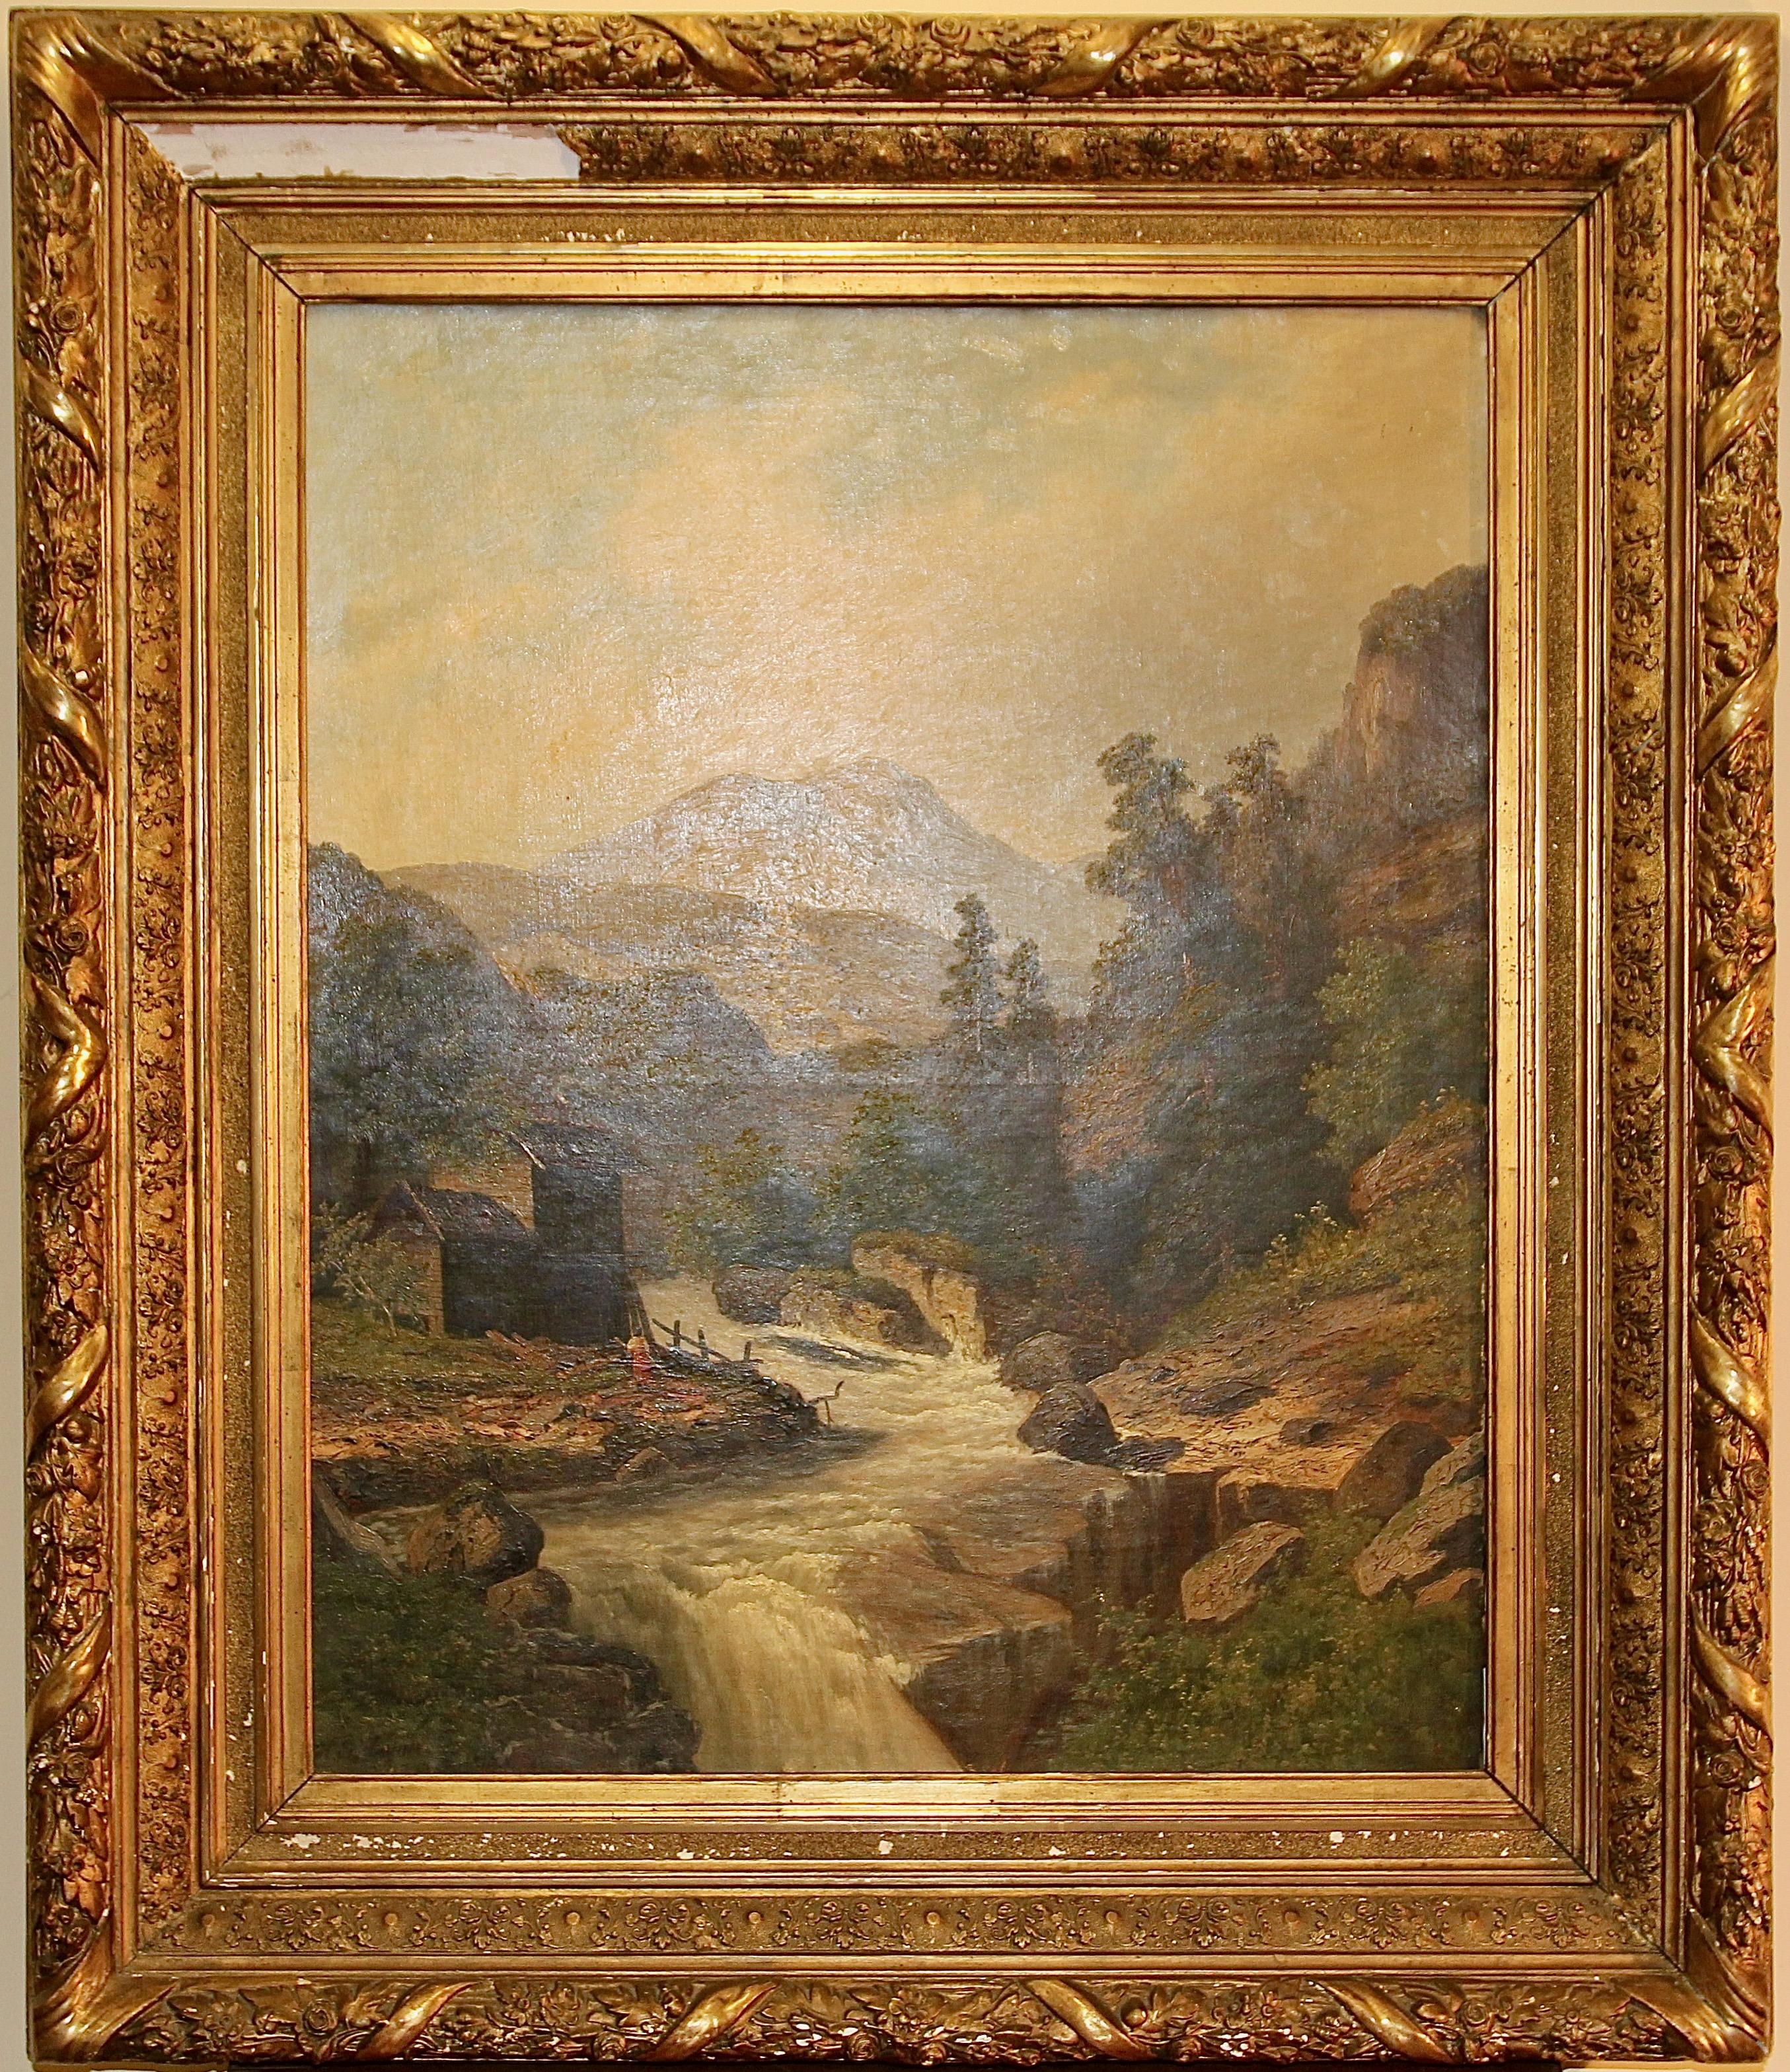 Unknown Landscape Painting - Oil painting, 19th century, river and mountain landscape. 